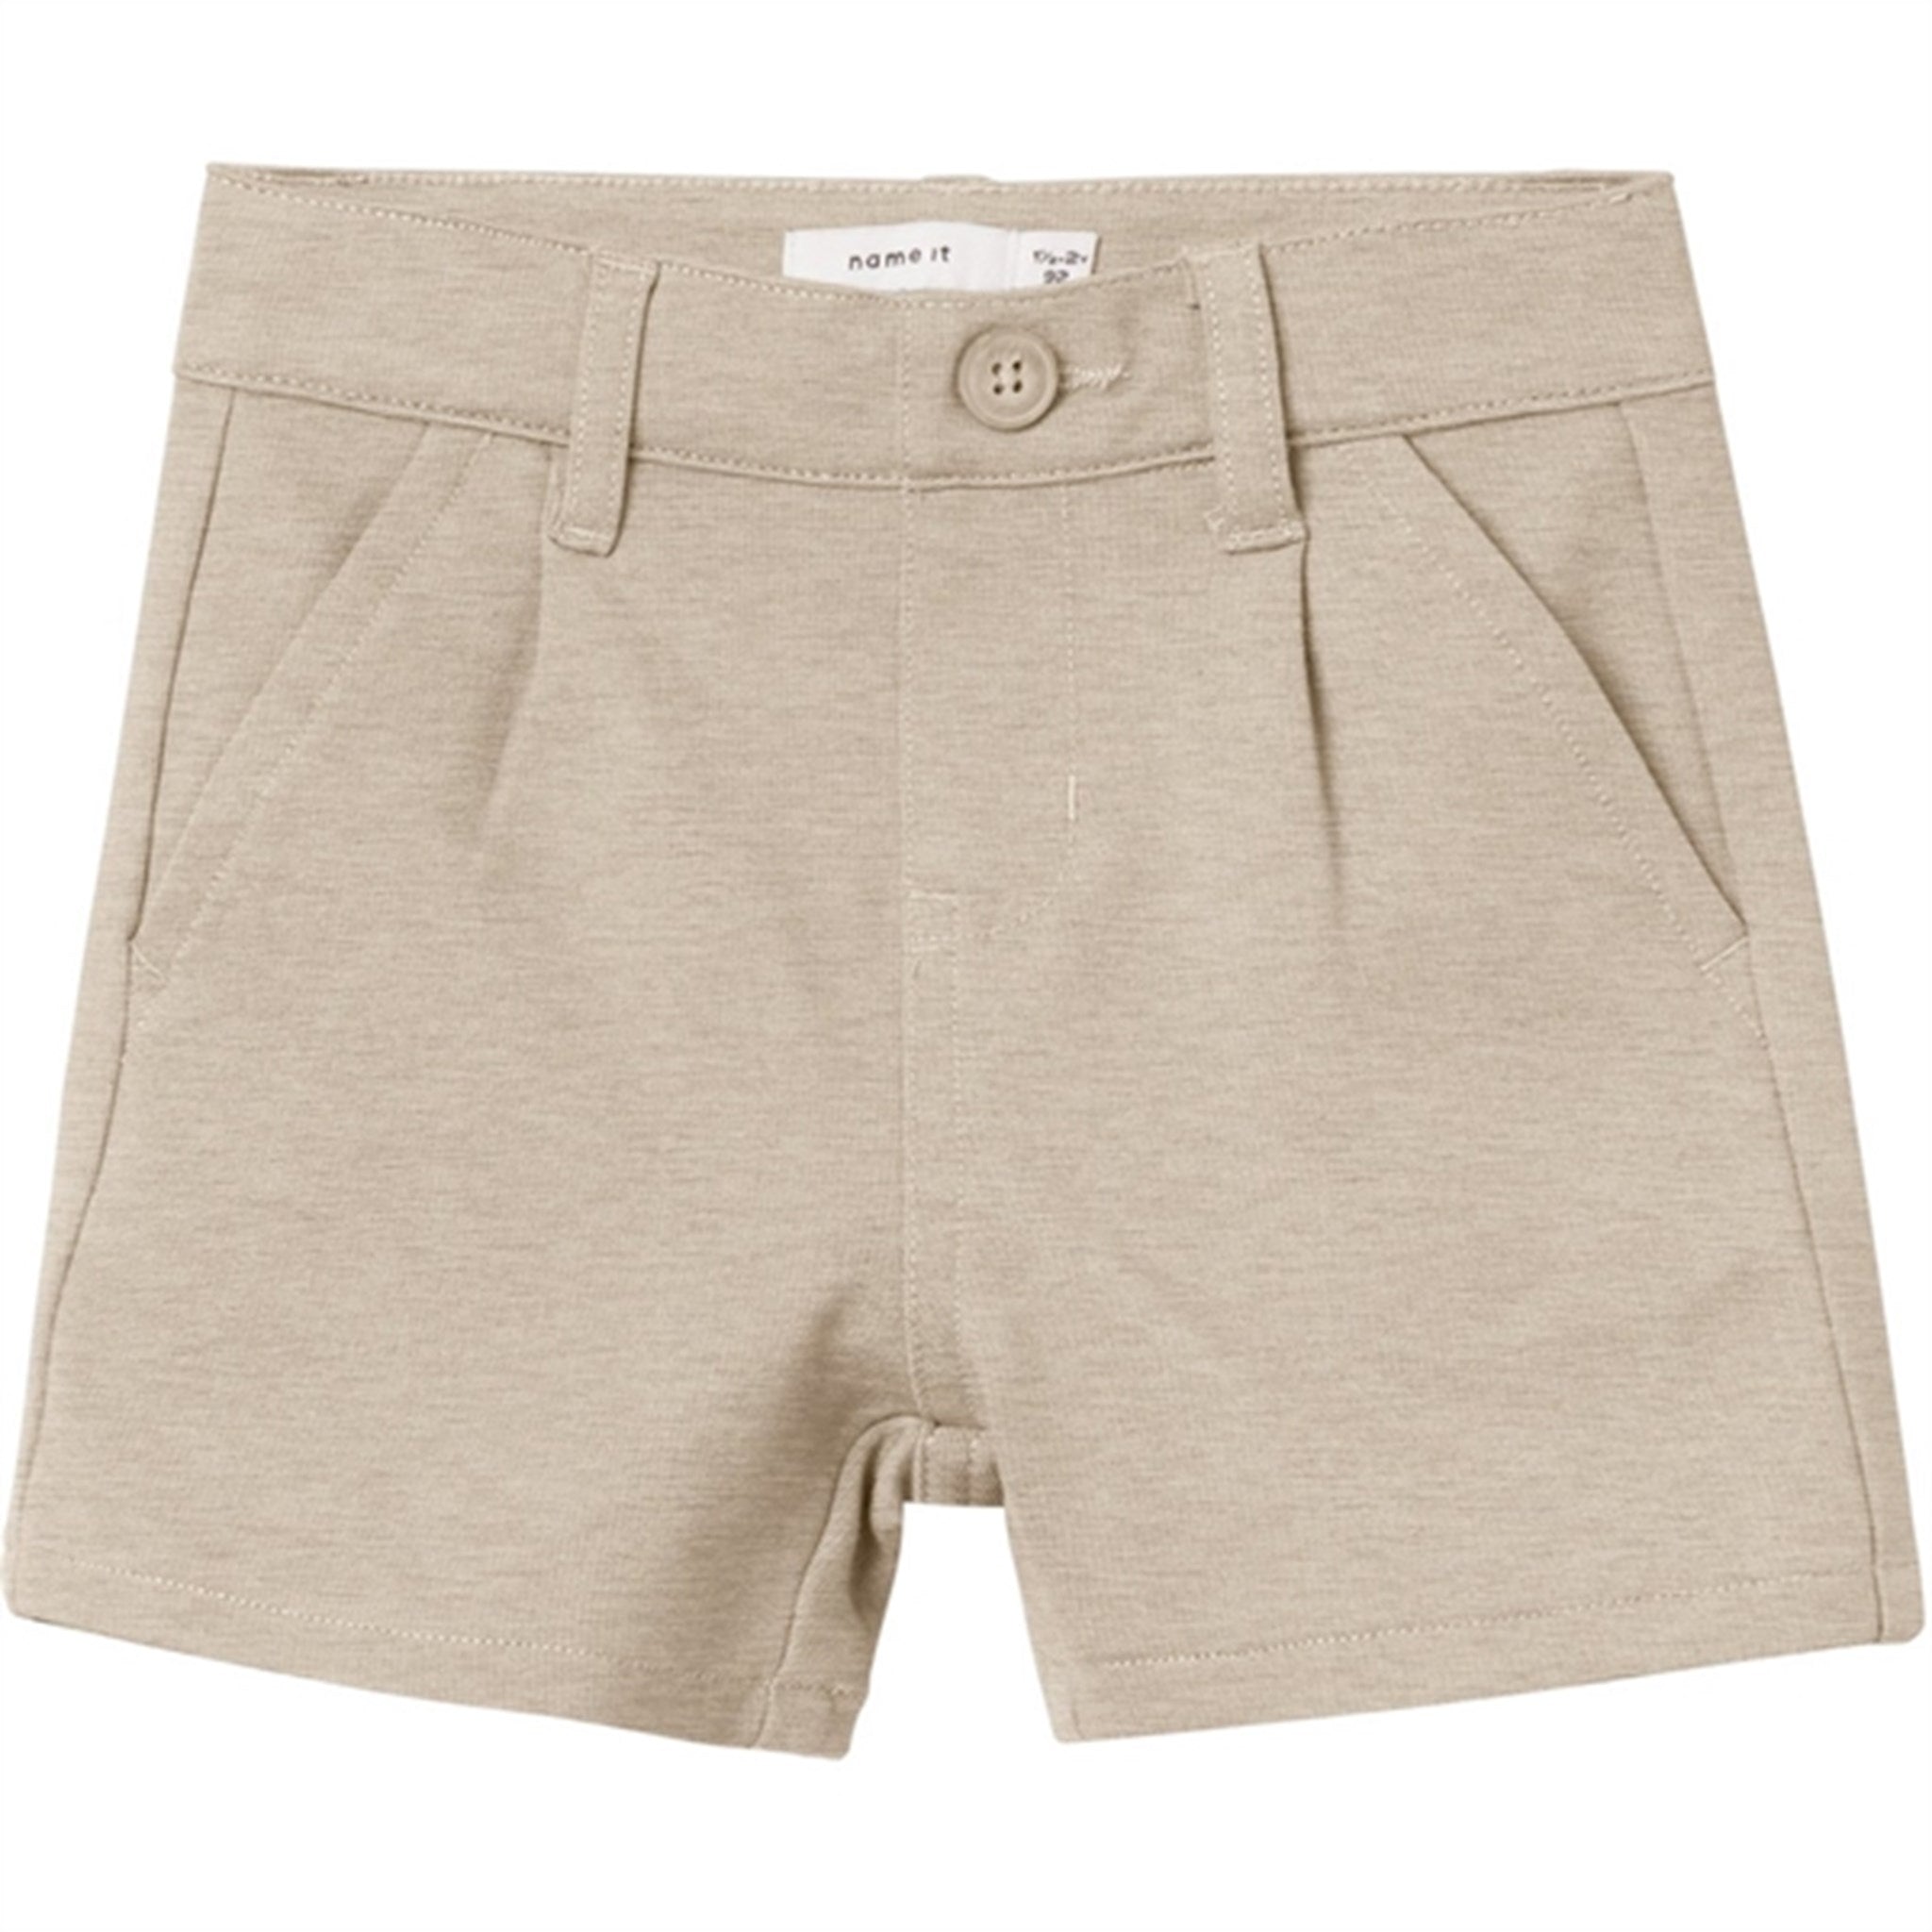 Name it Pure Cashmere Silas Comfort Shorts